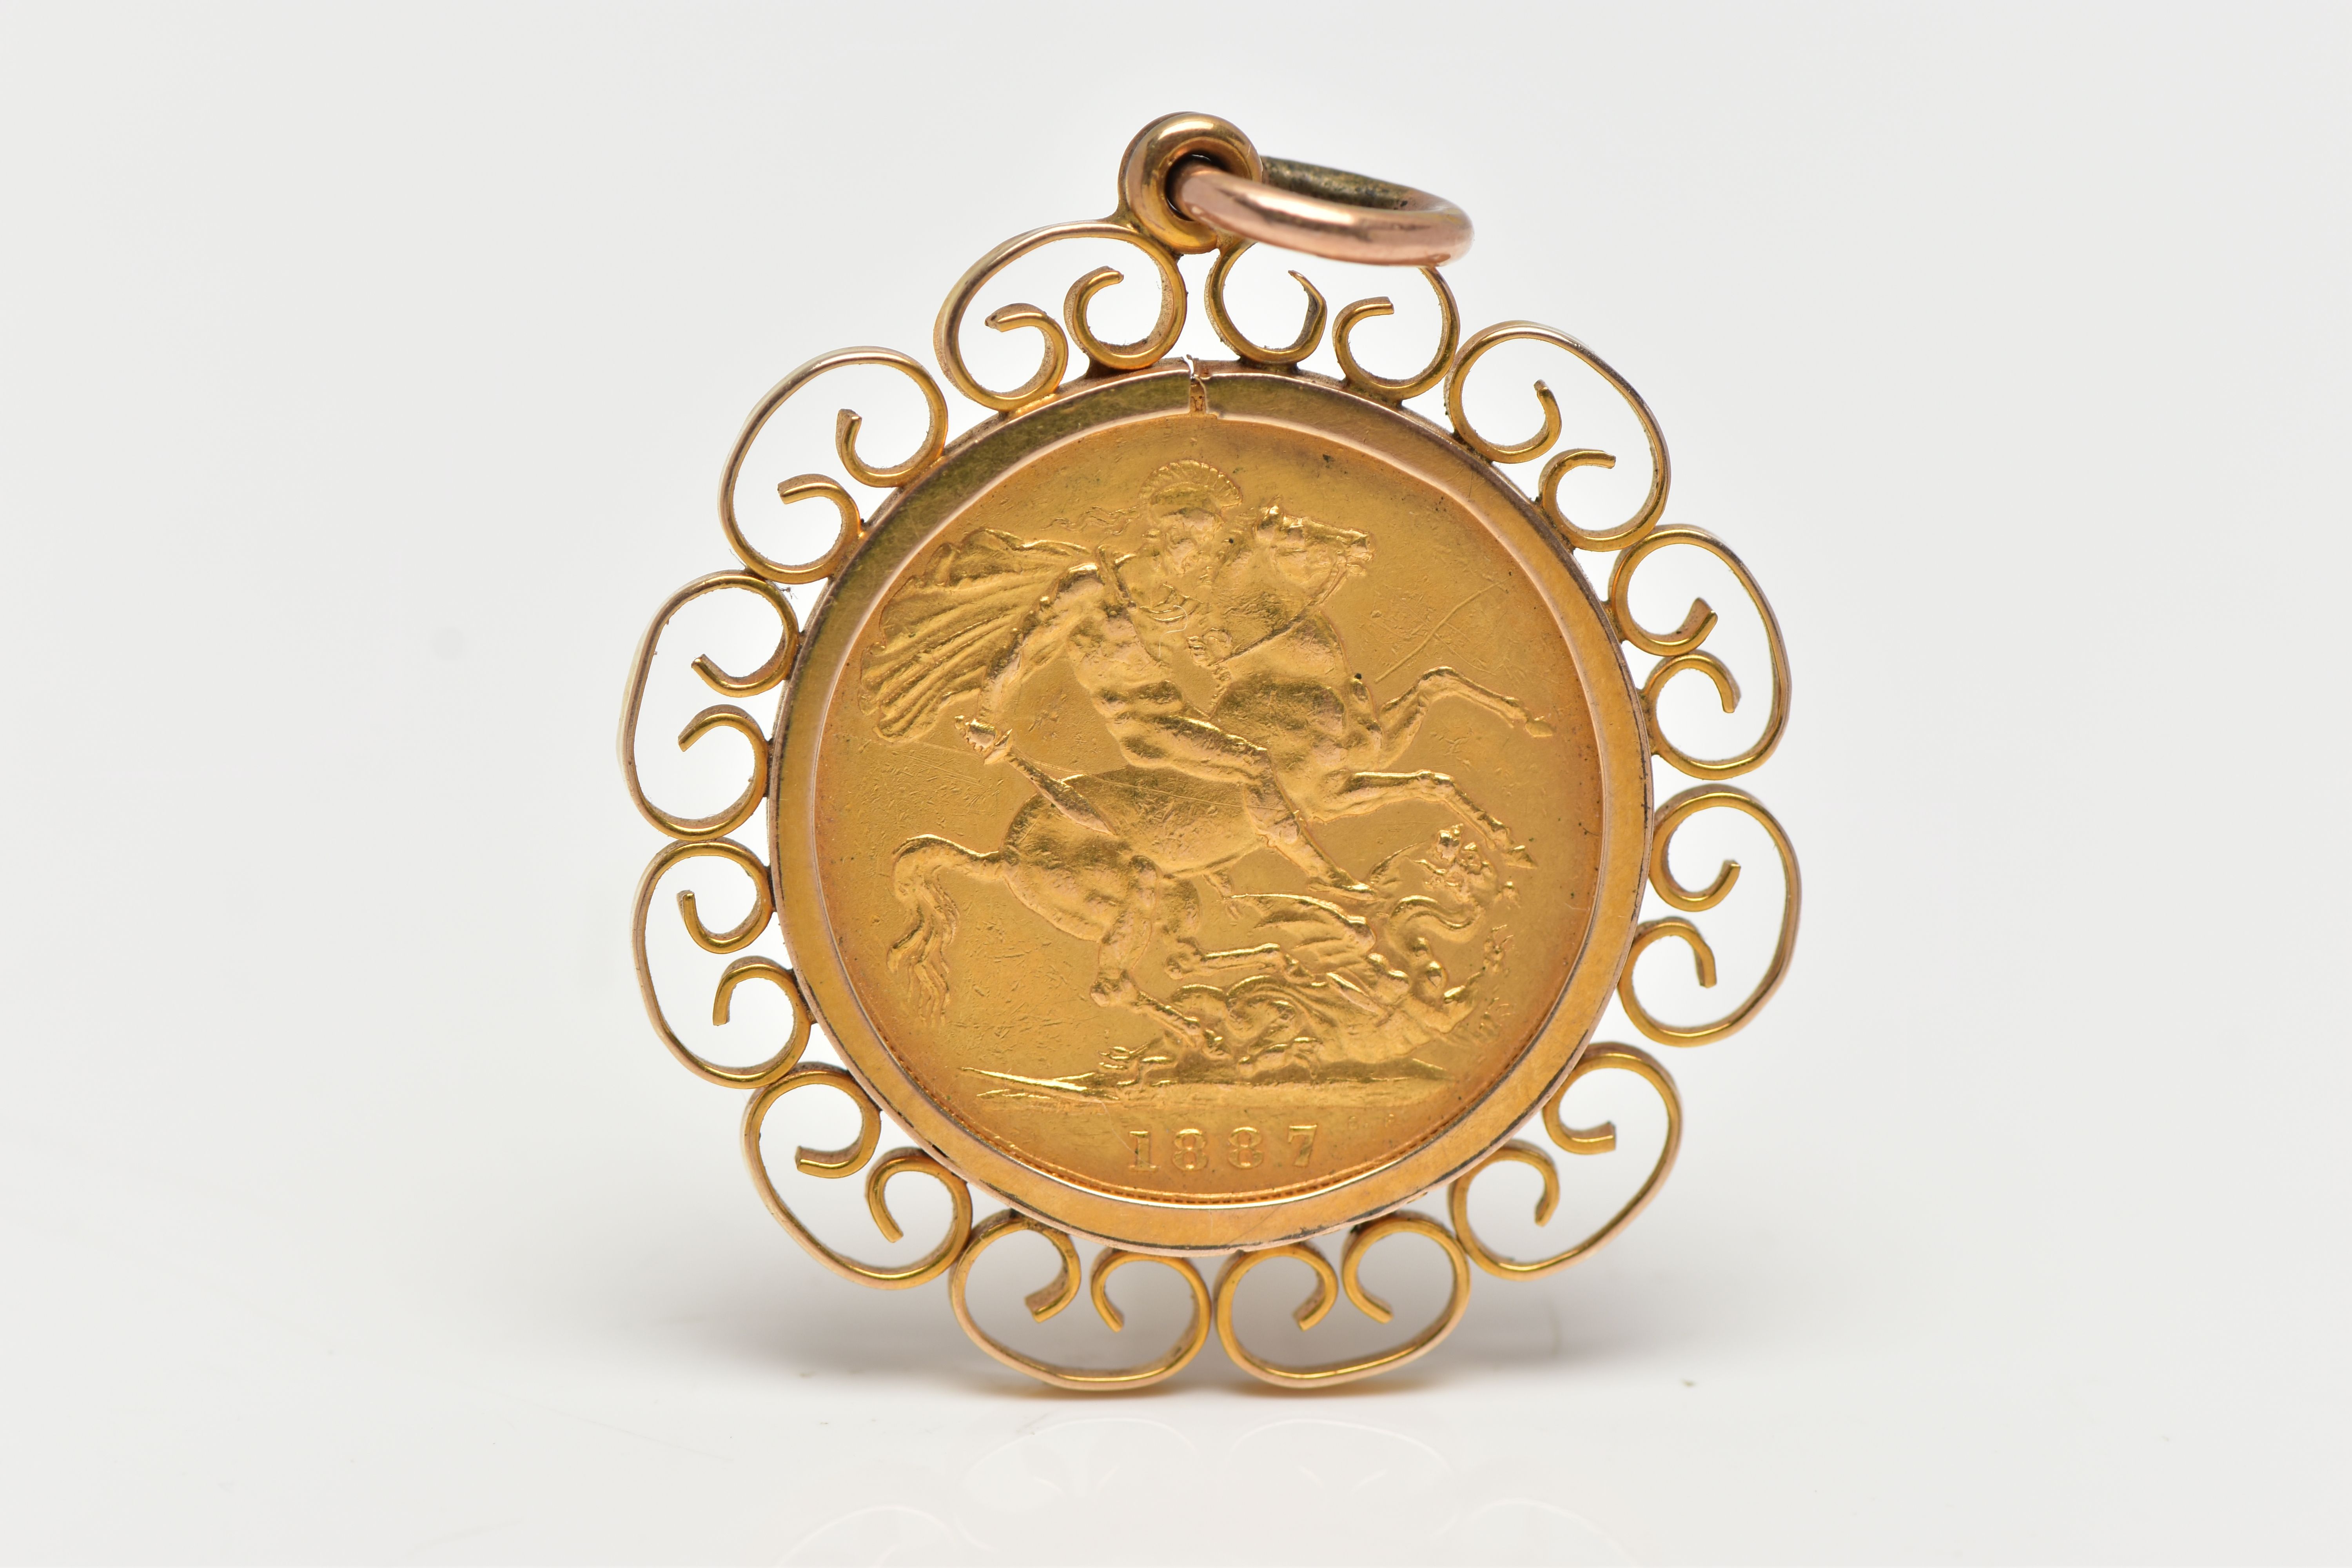 A FULL SOVEREIGN COIN PENDANT, the coin dated 1887, within an openwork scroll surround, pendant